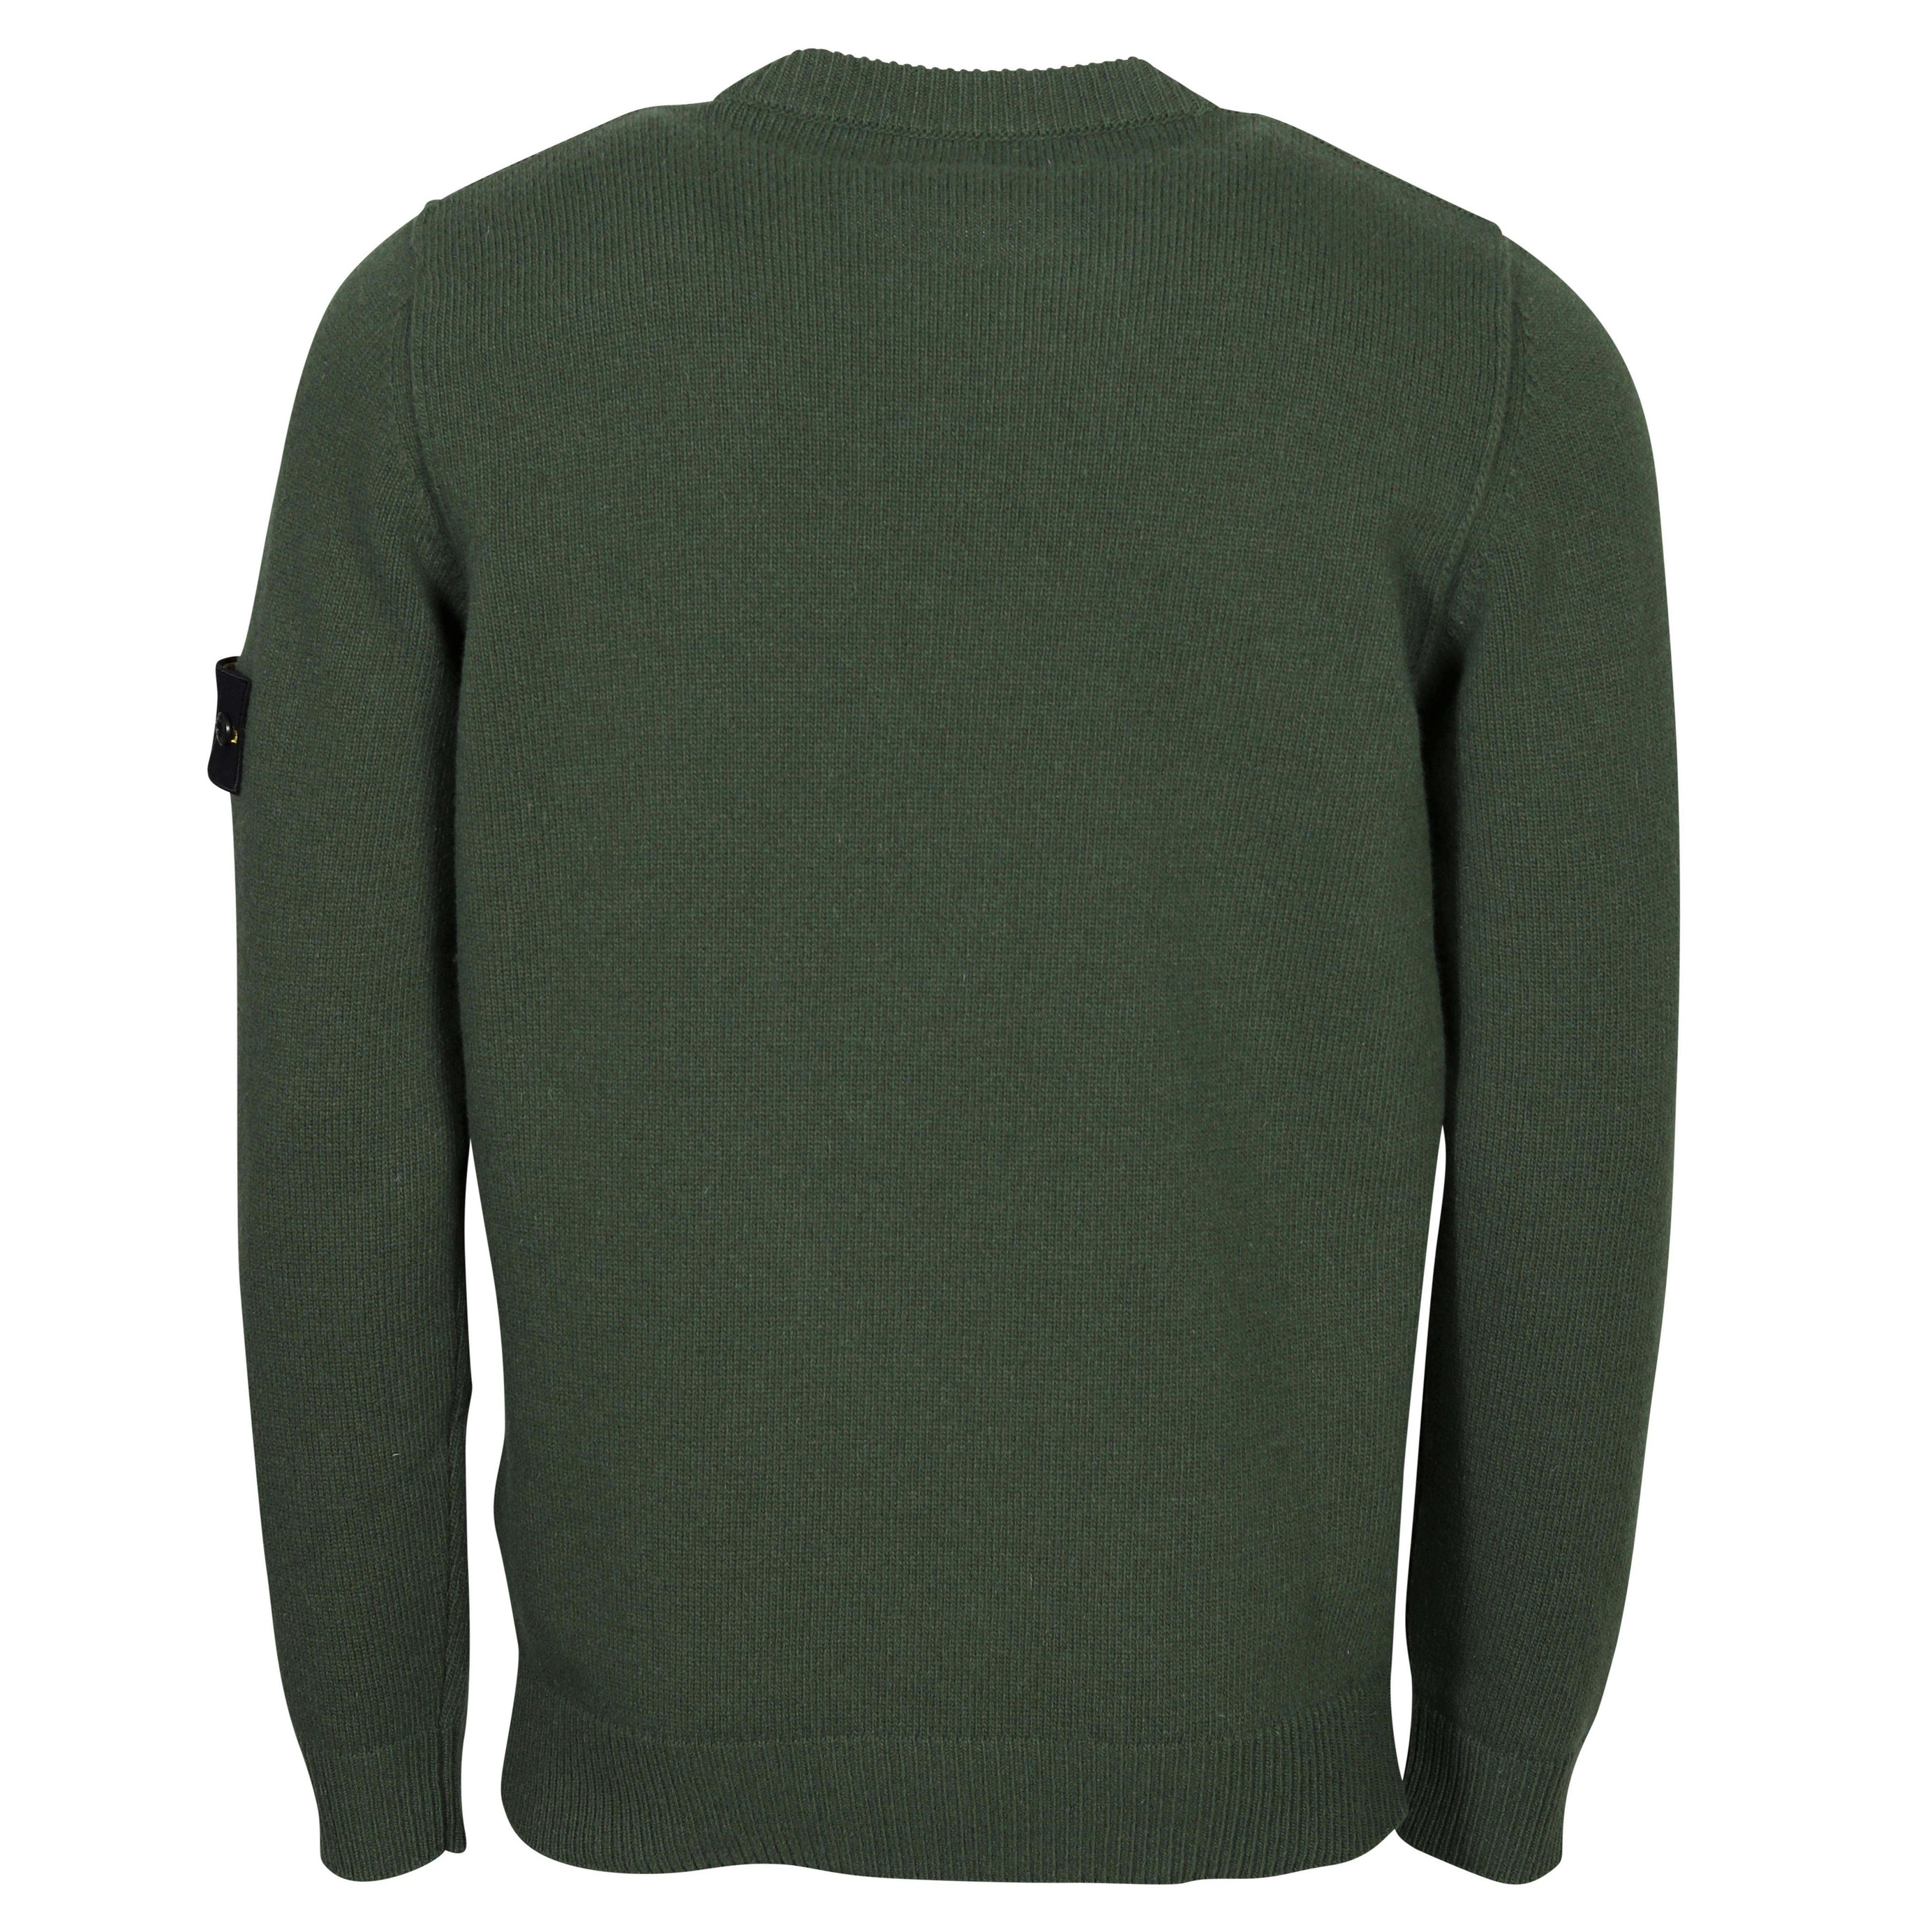 Stone Island Knit Sweater in Olive